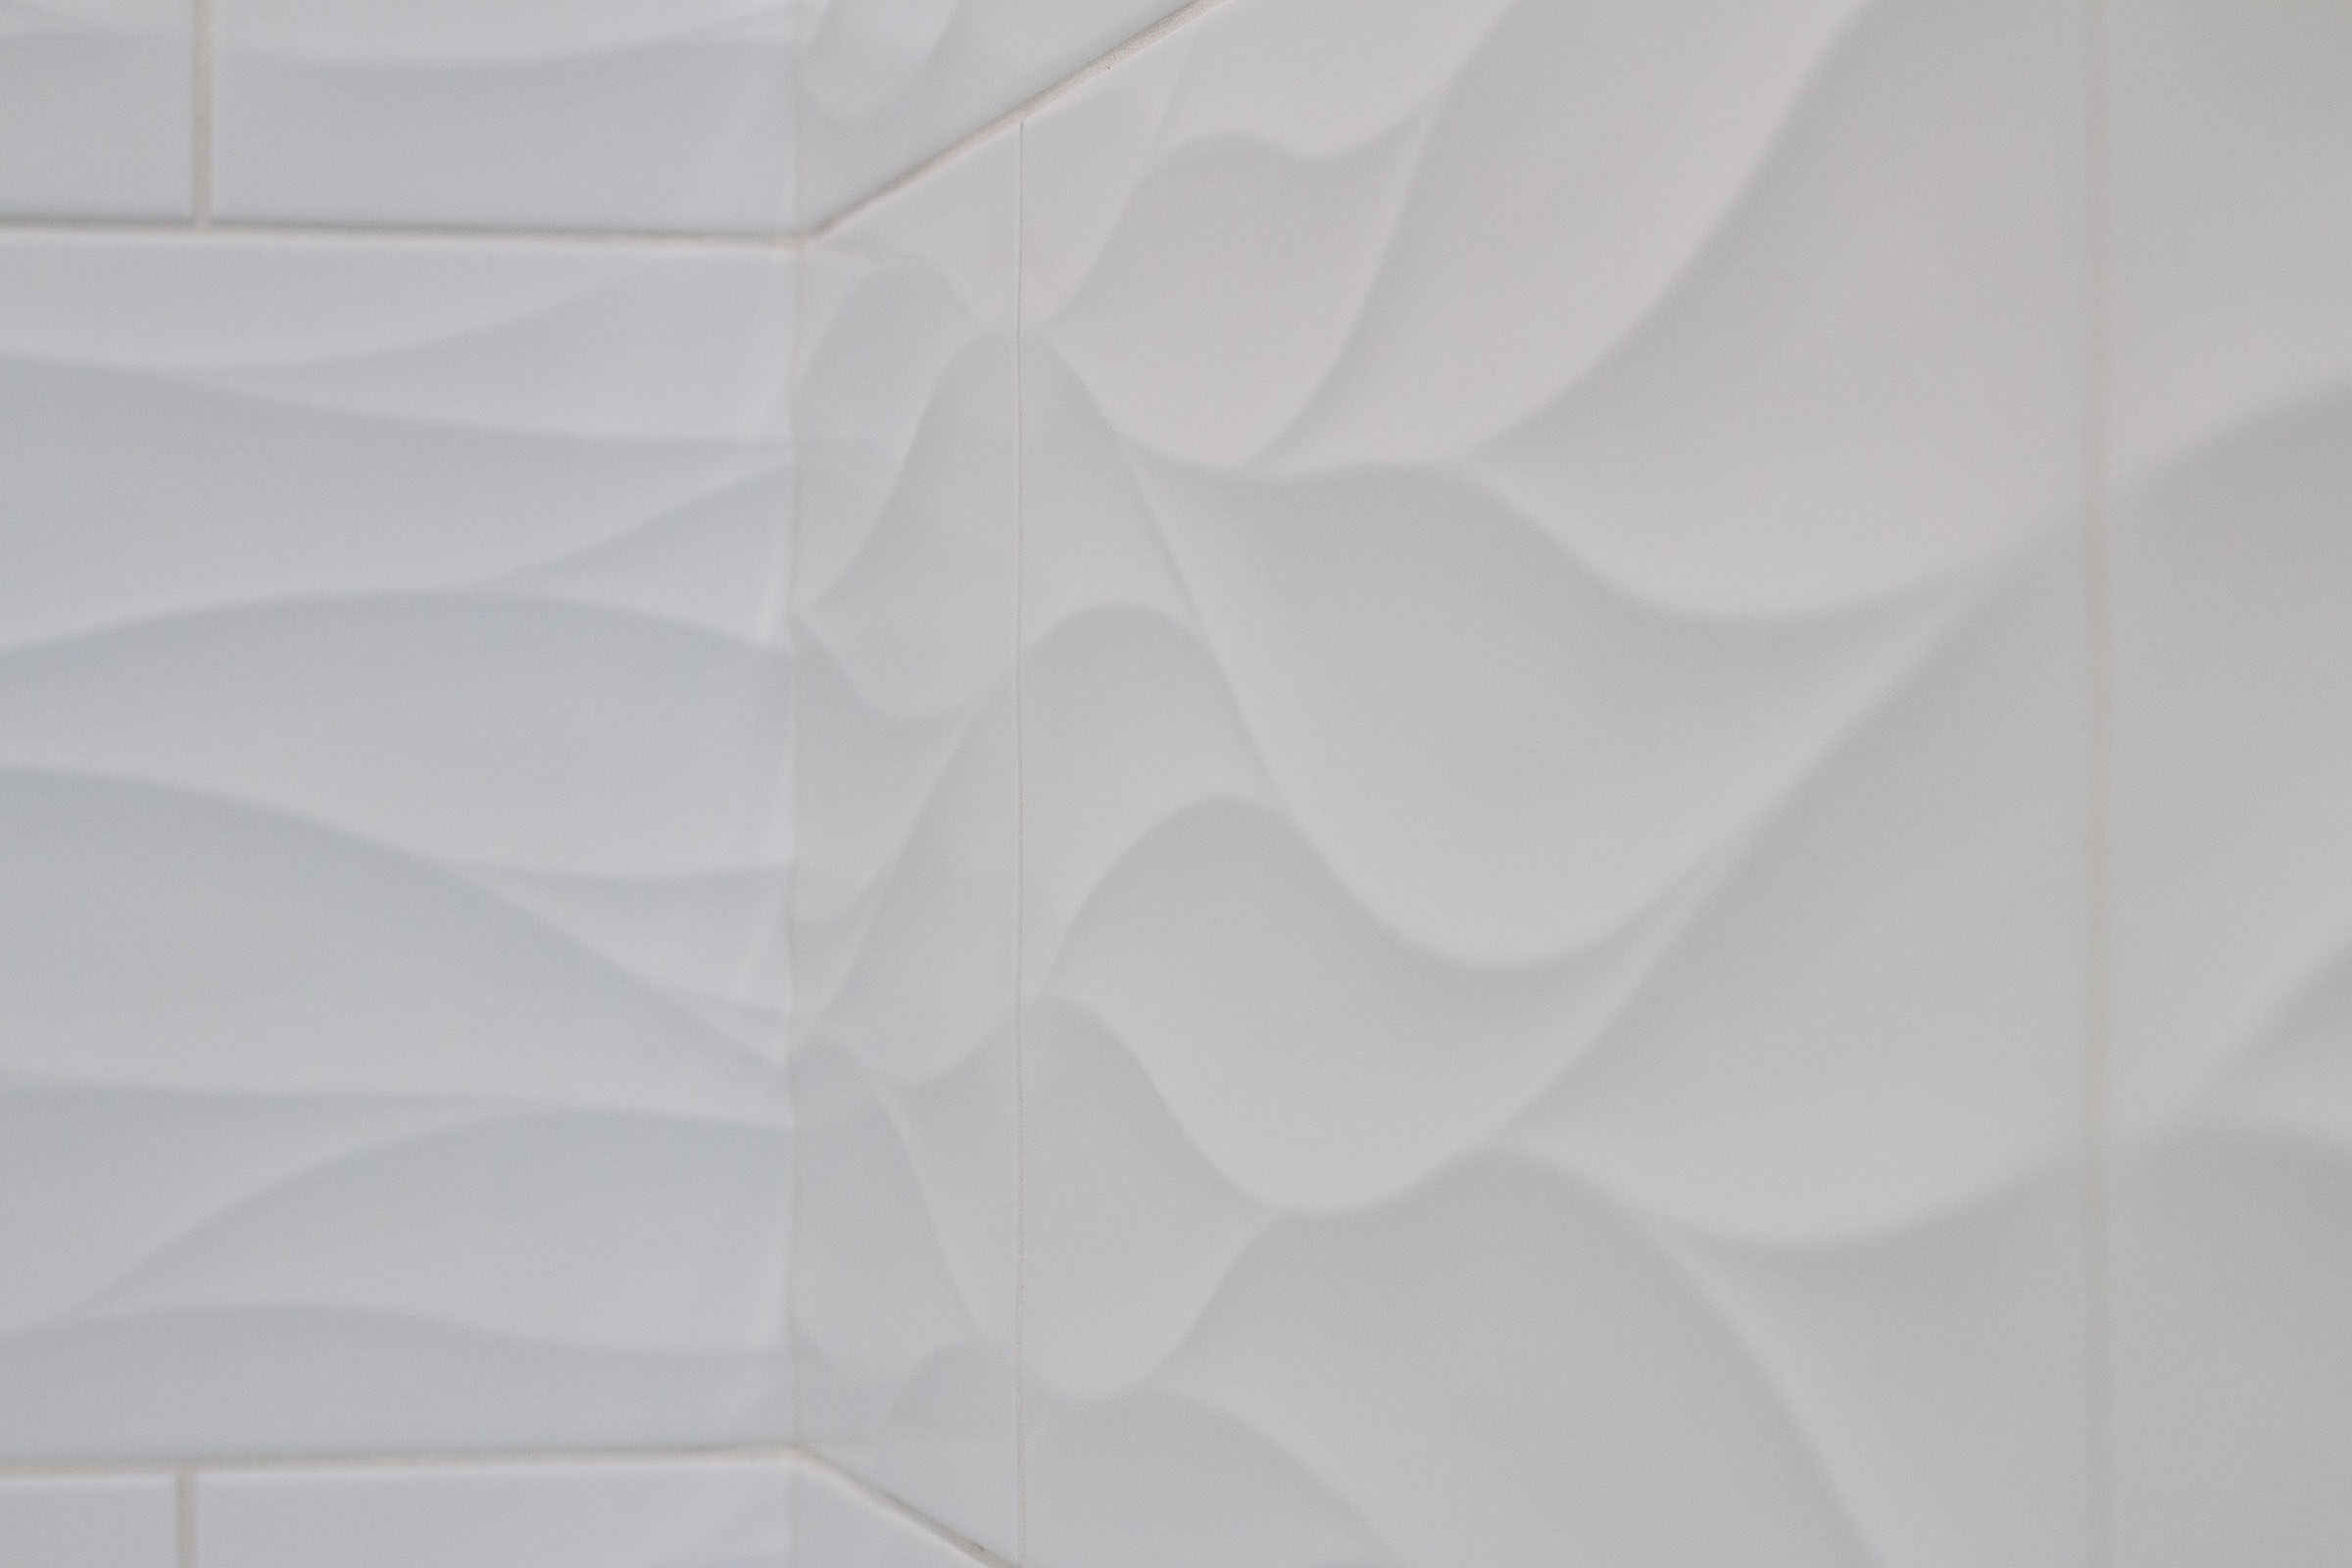 Close up of white shower tile with wavy texture